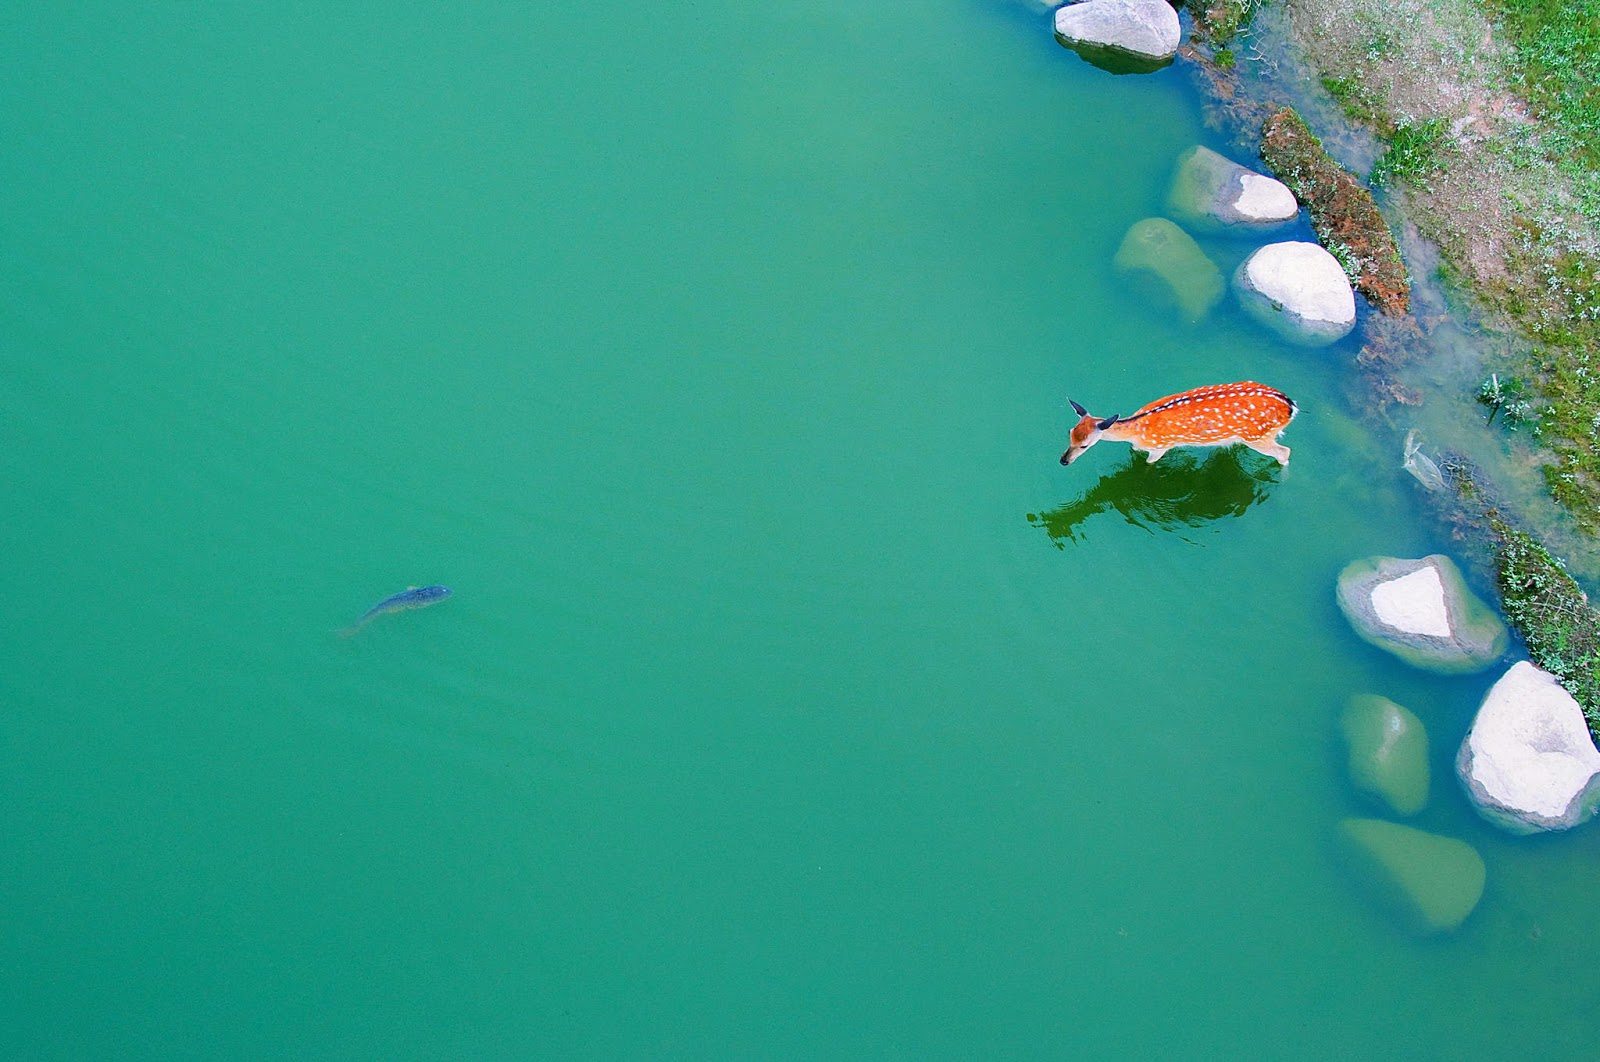 A deer in the water photographed by Jeongwon Park